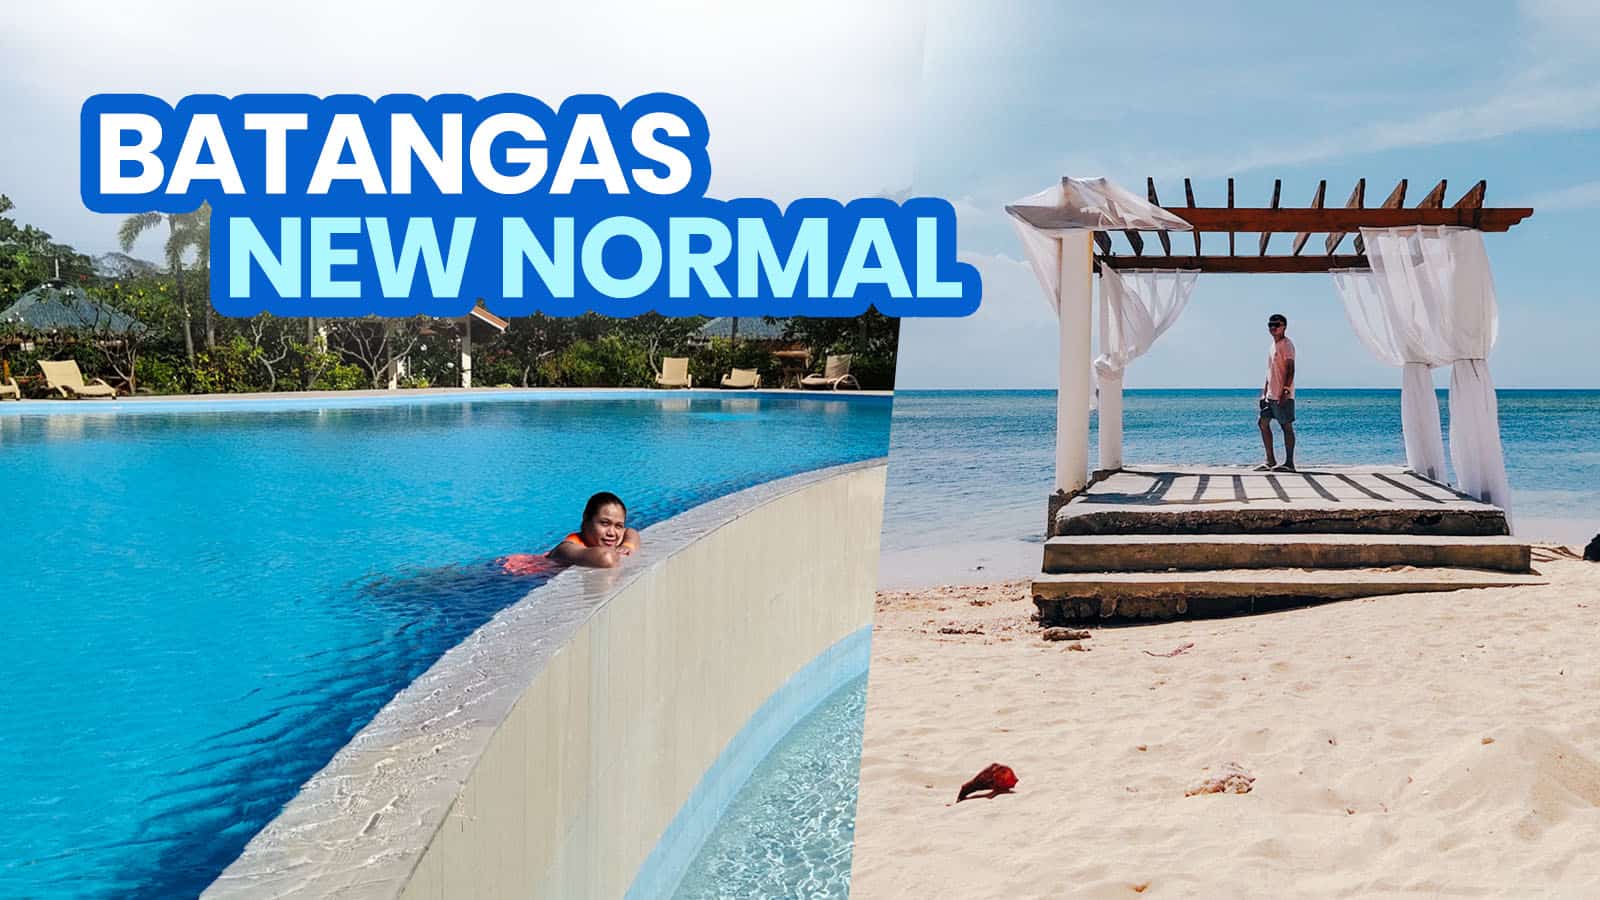 BATANGAS BEACHES: NEW NORMAL TRAVEL GUIDE & TIPS